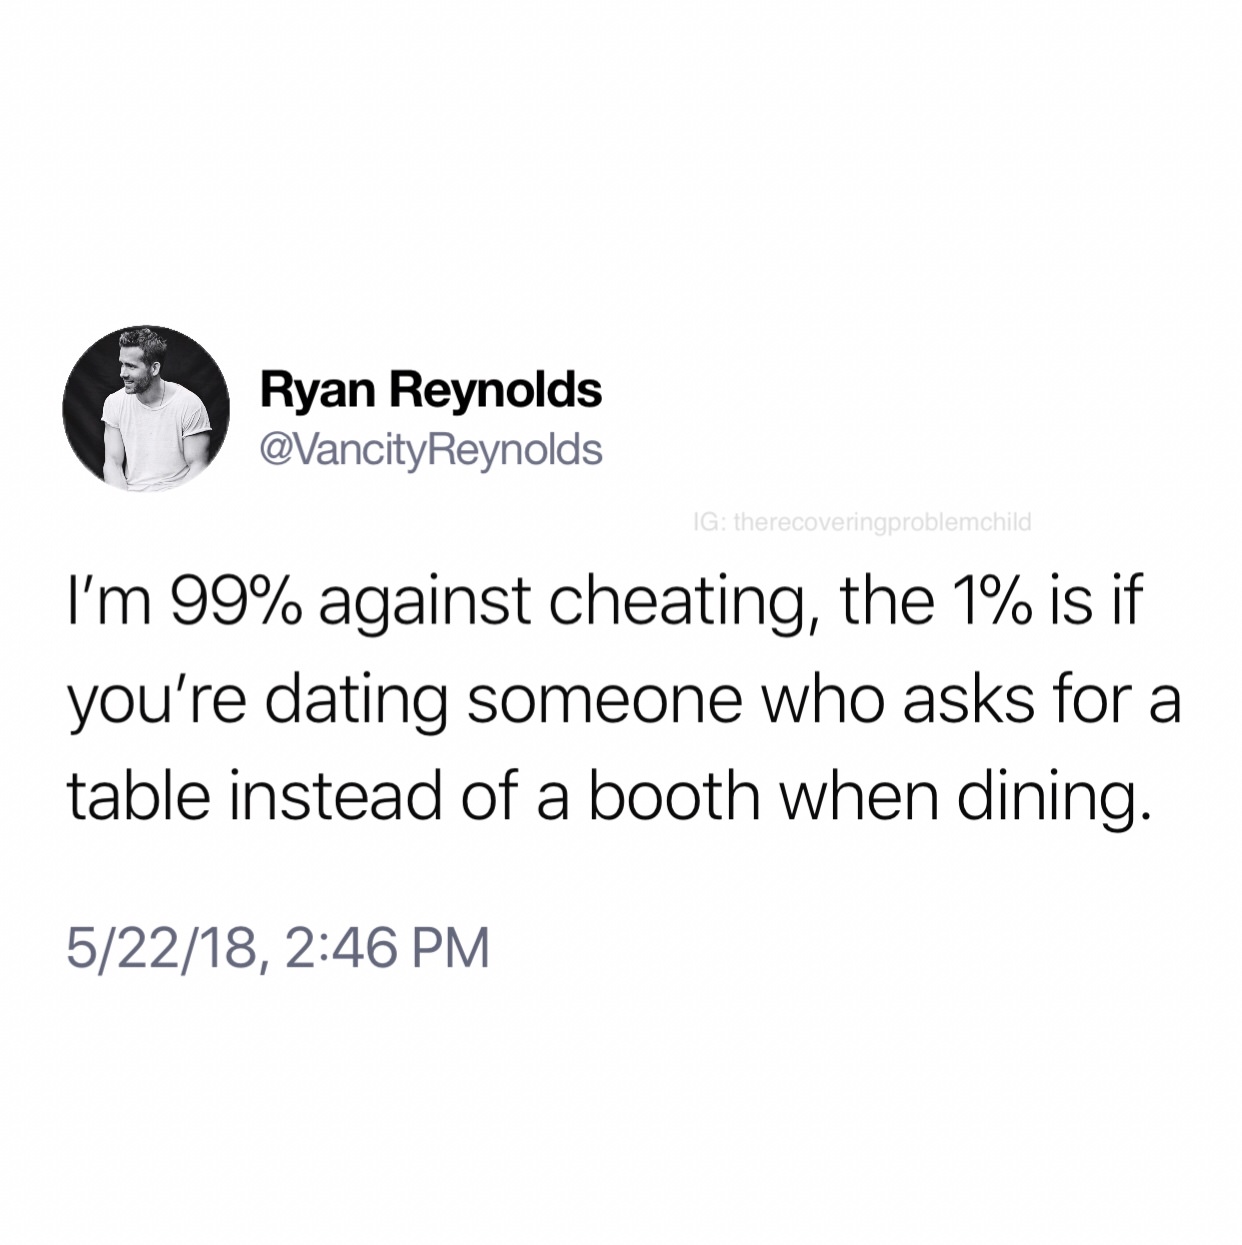 angle - Ryan Reynolds Reynolds Ig therecoveringproblemchild I'm 99% against cheating, the 1% is if you're dating someone who asks for a table instead of a booth when dining. 52218,